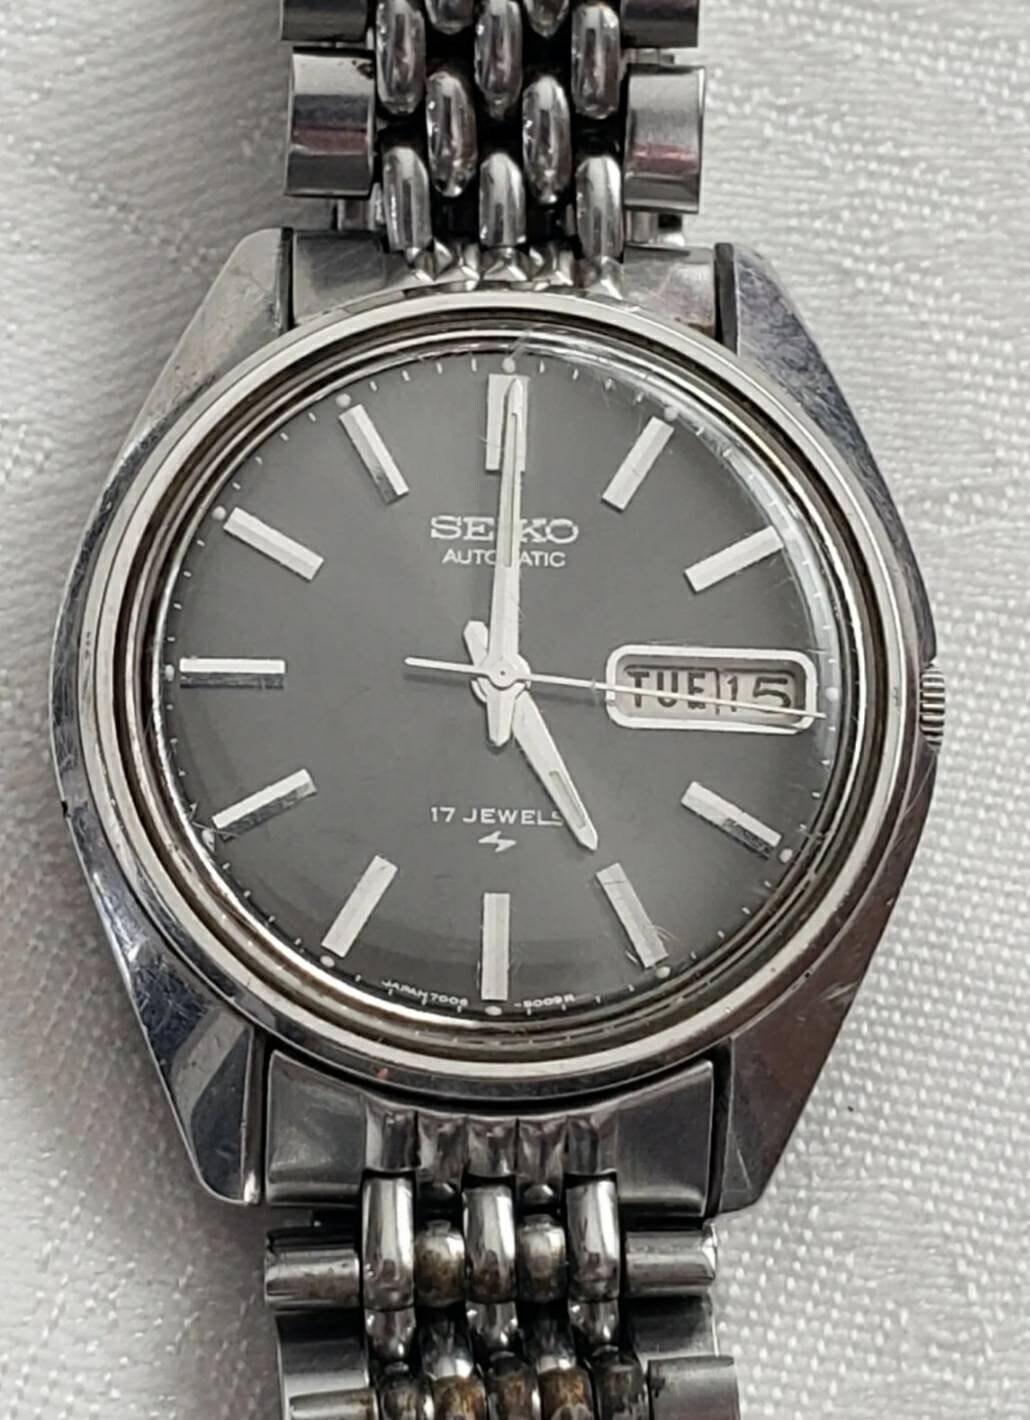 Vintage Seiko Watch Automatic 17 Jewels Retro Collectible Day - Etsy